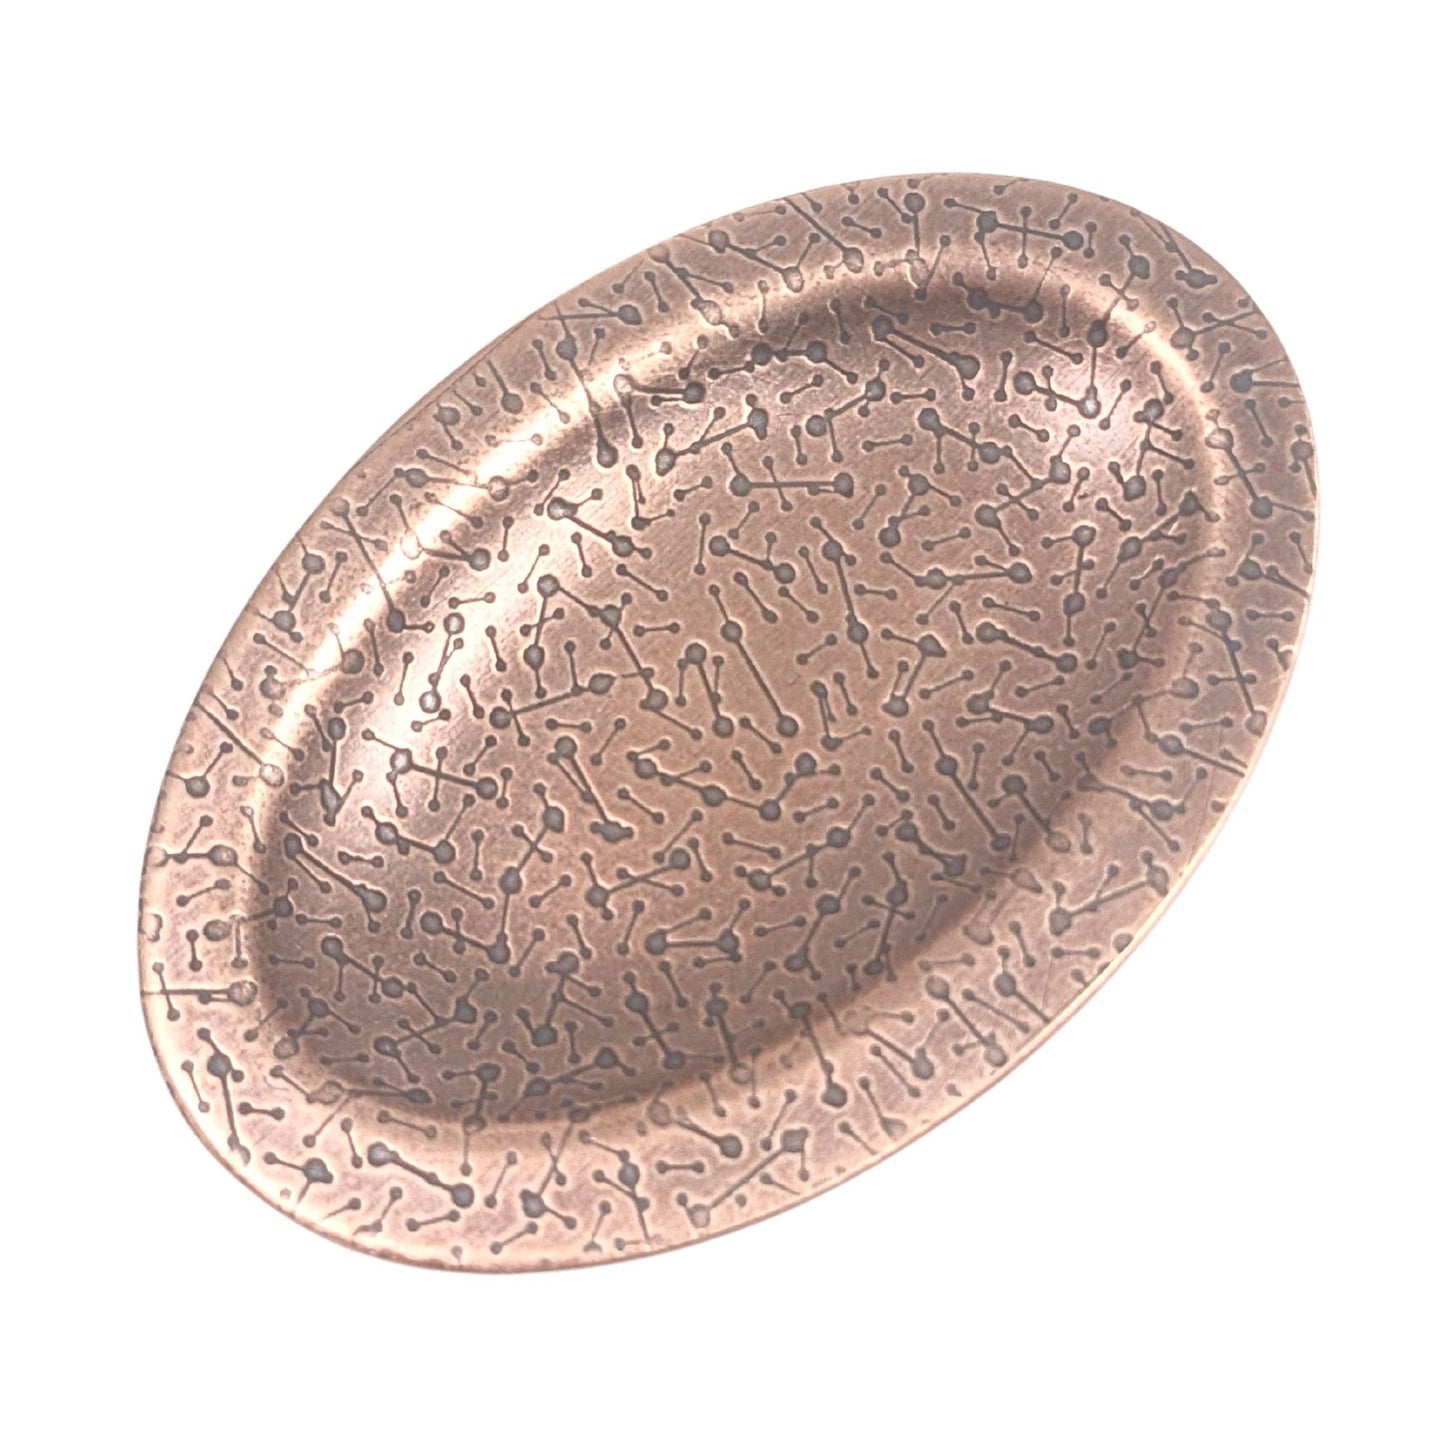 Oval ring dish made of copper. The dish has a shallow bowl with a lip around the edge. It is covered in a pattern meant to represent a meteor shower. The pattern is impressed into the copper and is short lines with small solid circles at the end. The design is oxidized, which means the impressed parts are dark, almost black.